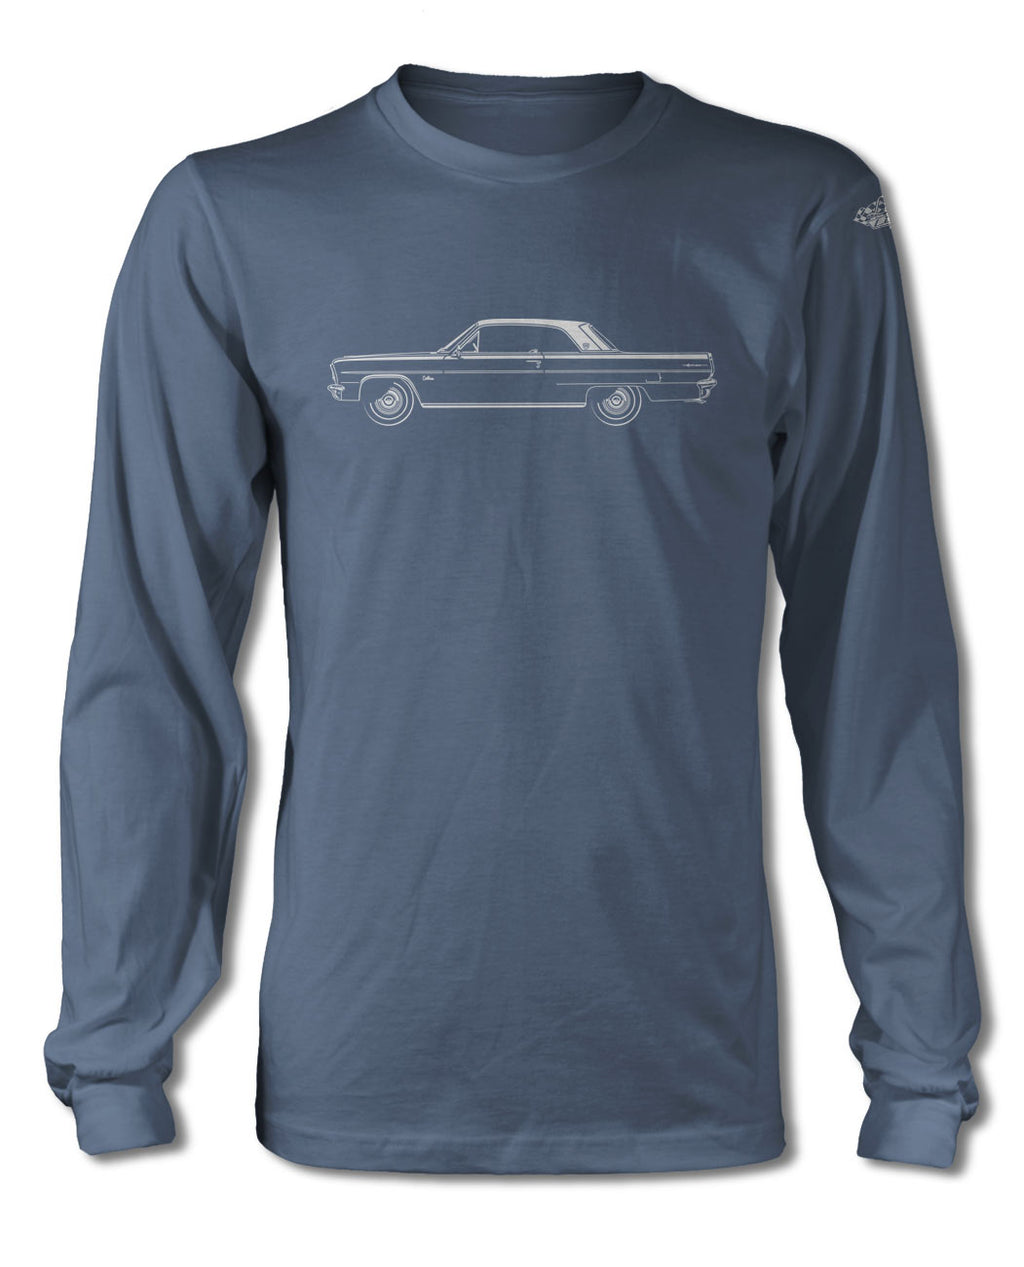 1963 Oldsmobile Cutlass Coupe T-Shirt - Long Sleeves - Side View